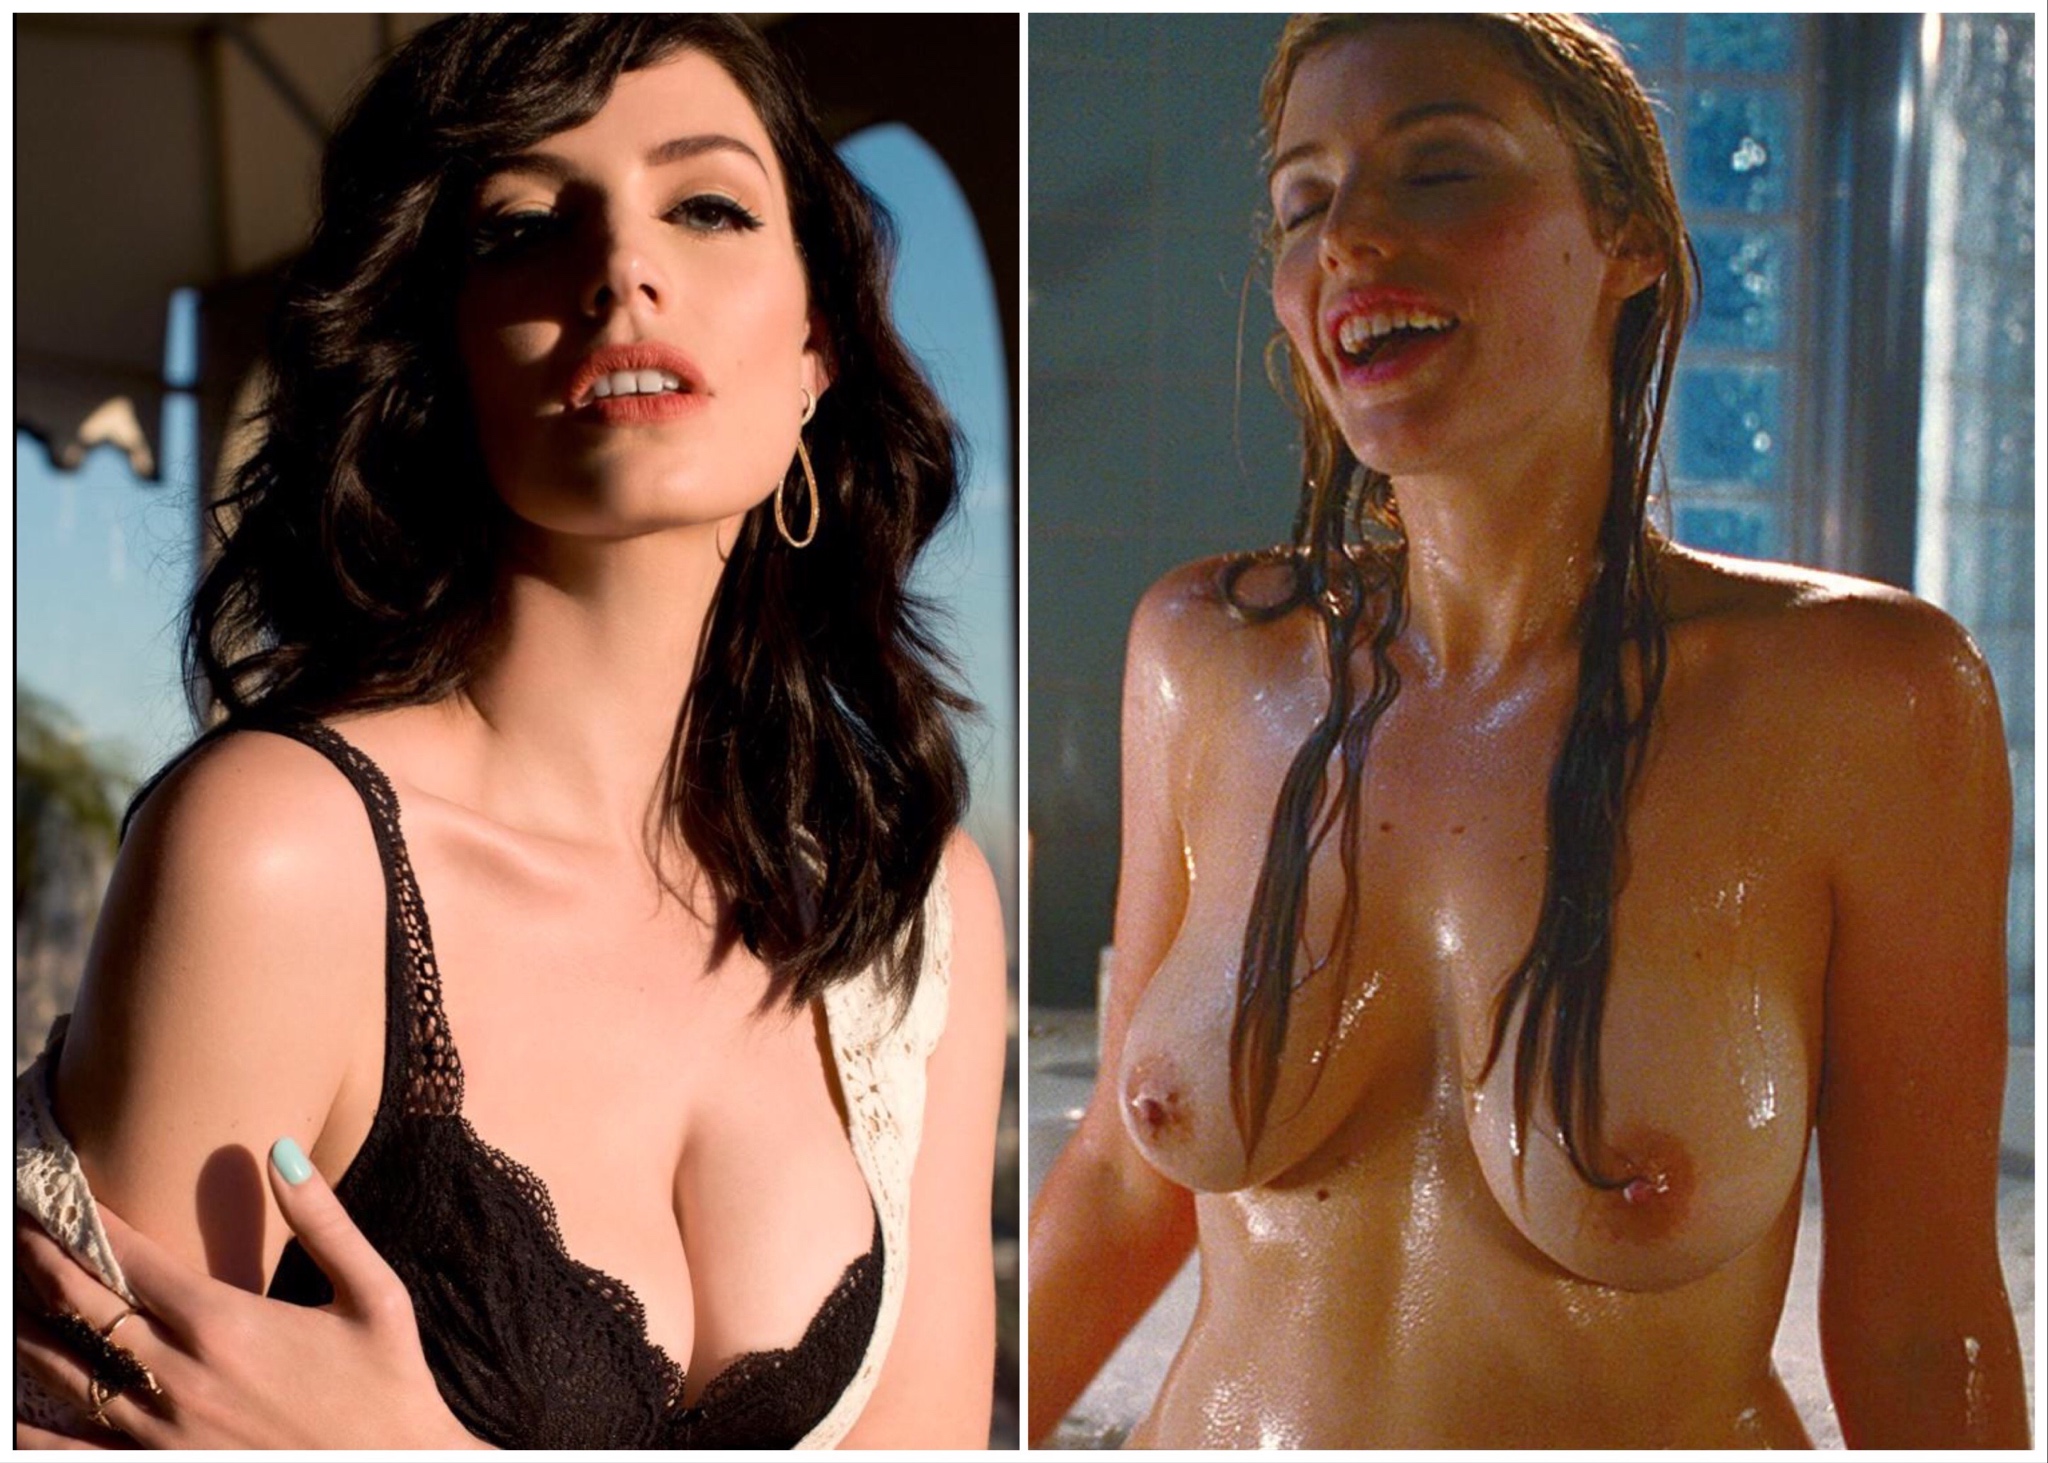 Jessica pare nude photos - 42 Sexy and Hot Jessica Pare Pictures.